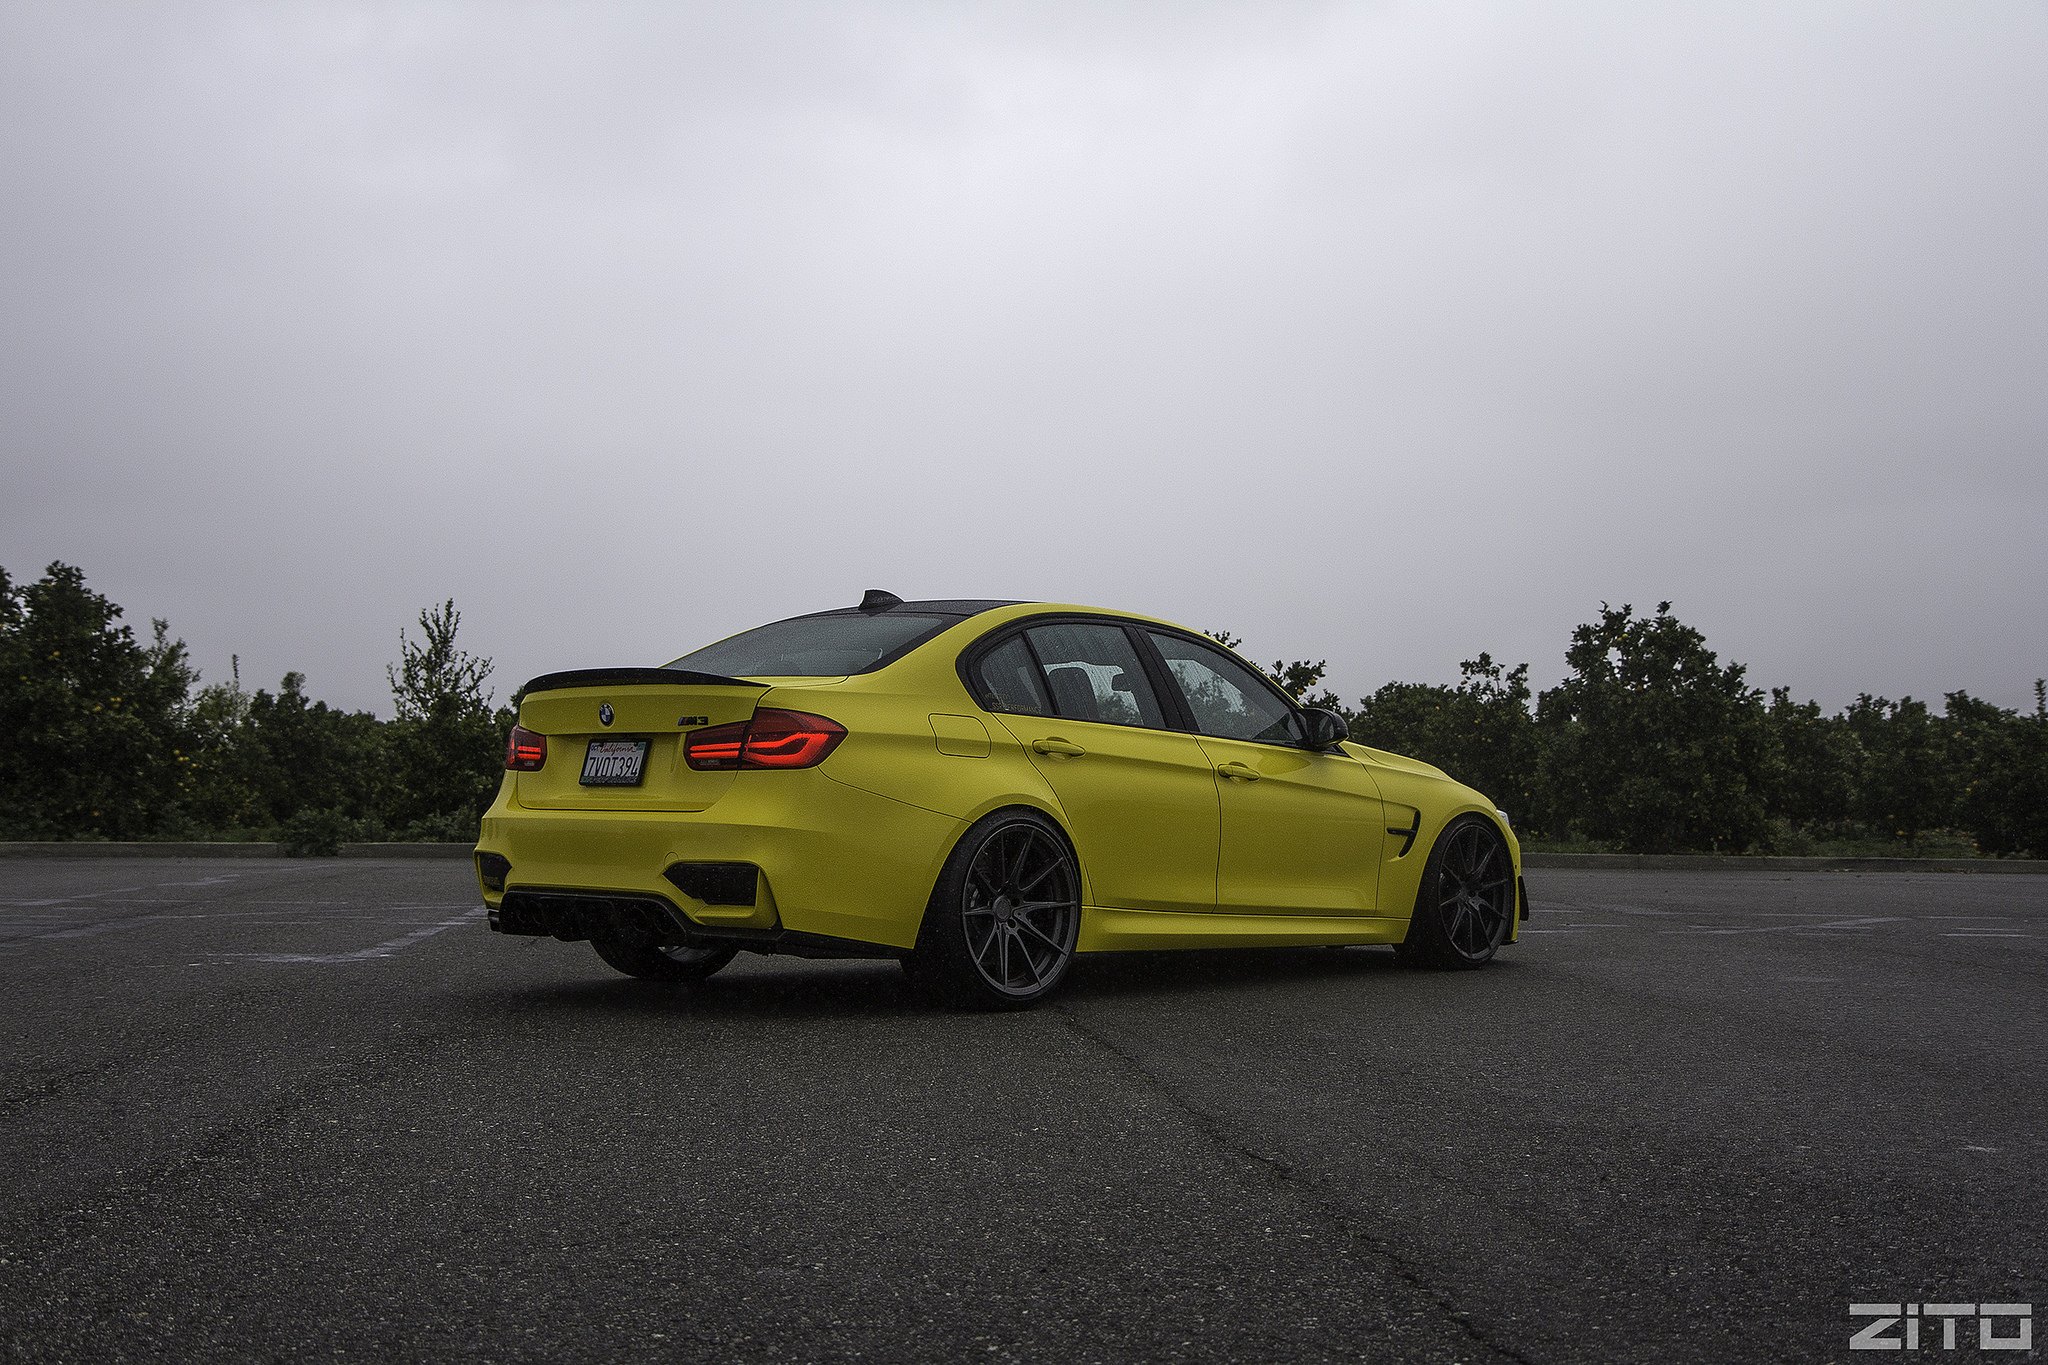 Rear Lip Spoiler on Yellow BMW 3-Series - Photo by Zito Wheels